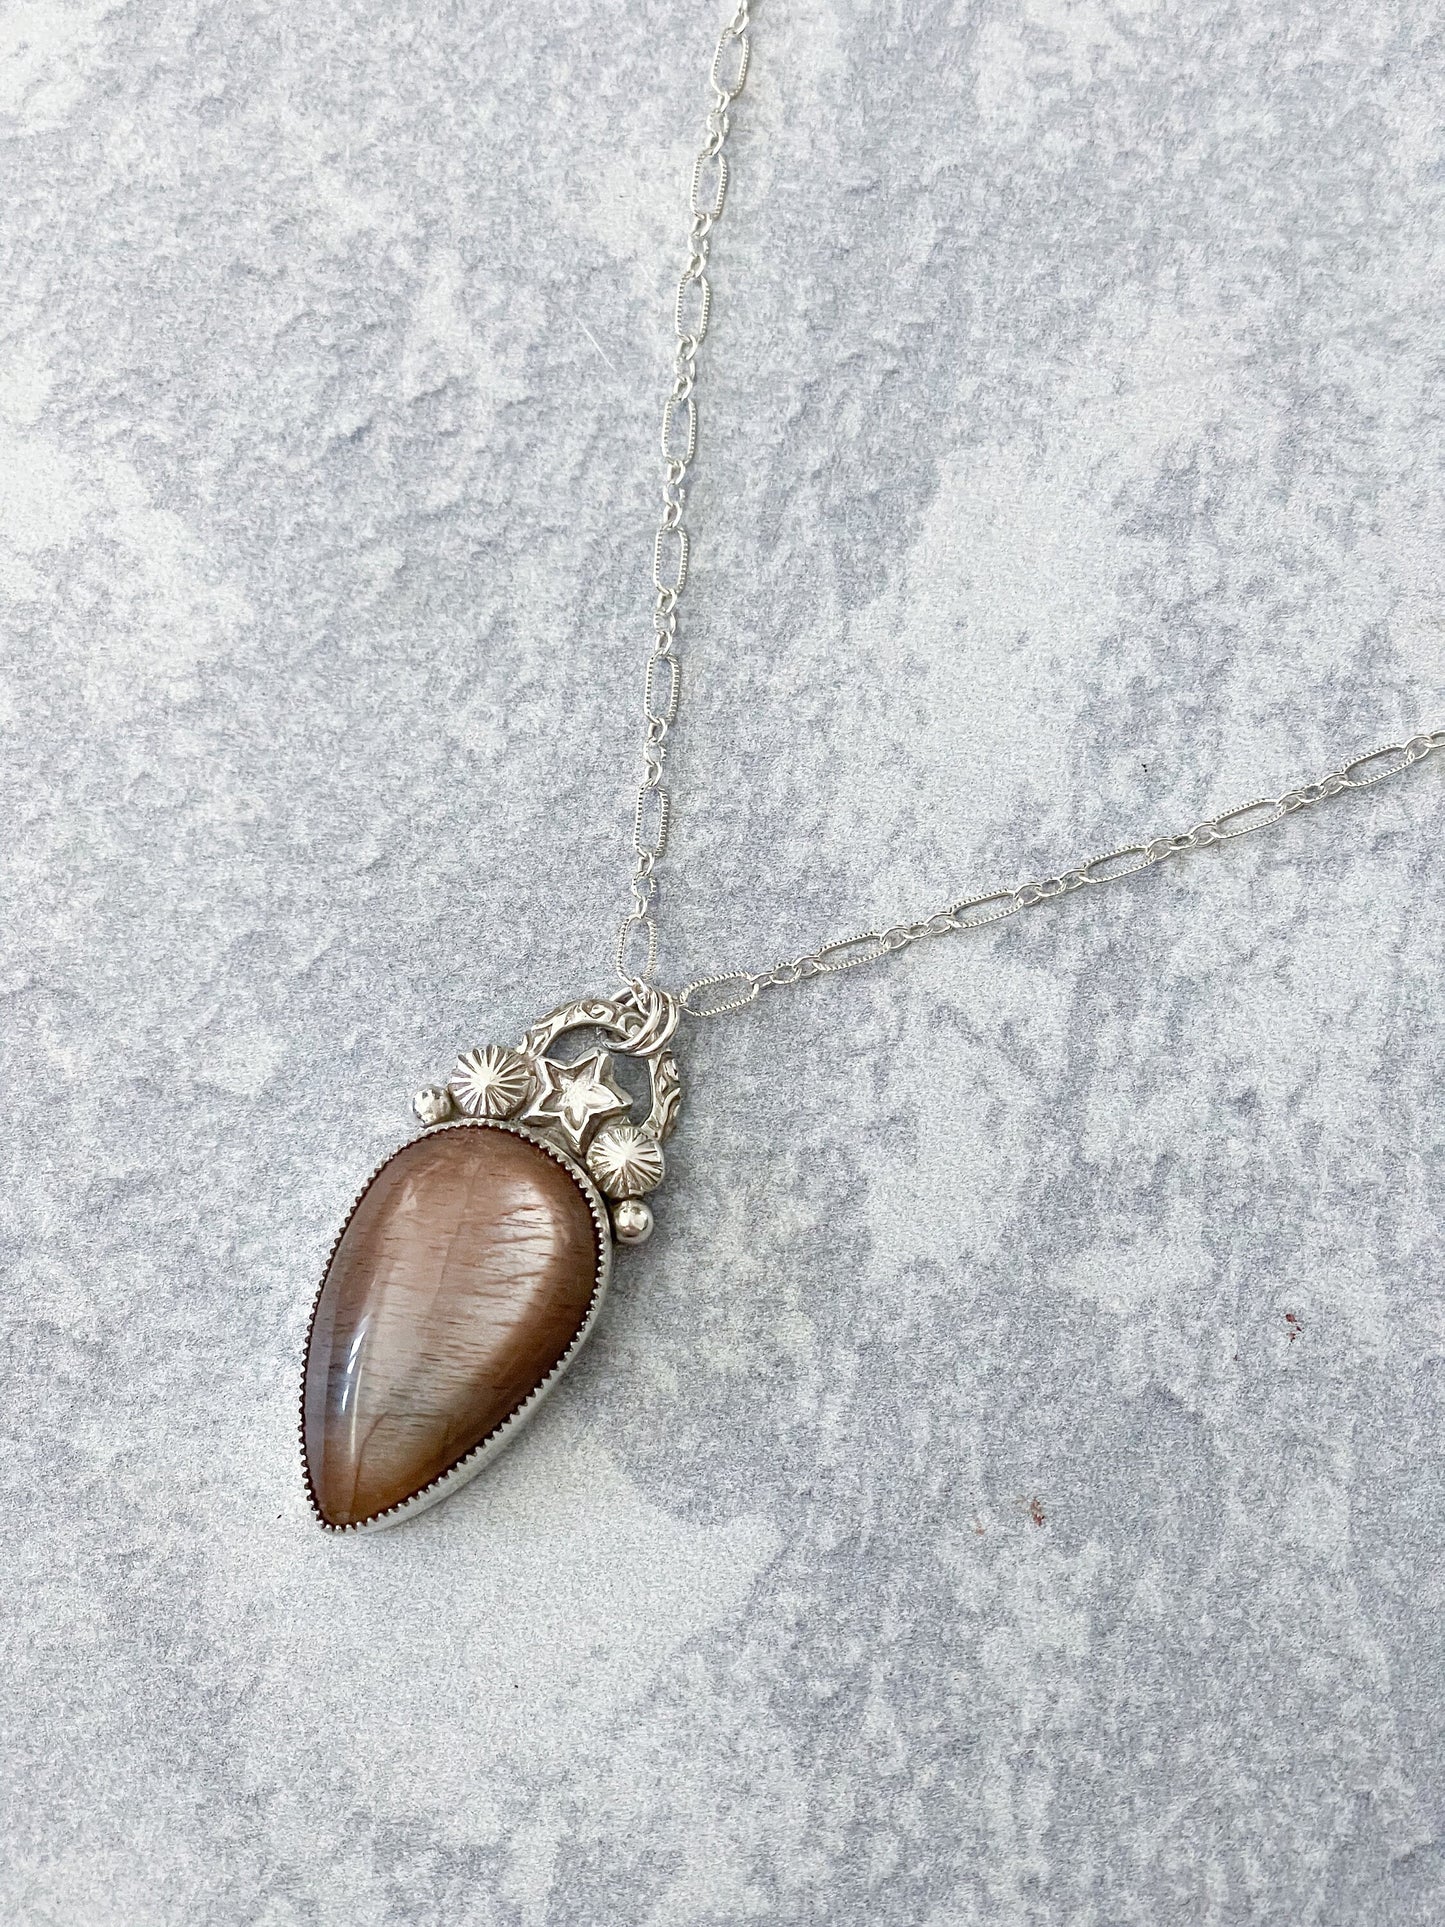 Peach Moonstone Sterling Silver Necklace